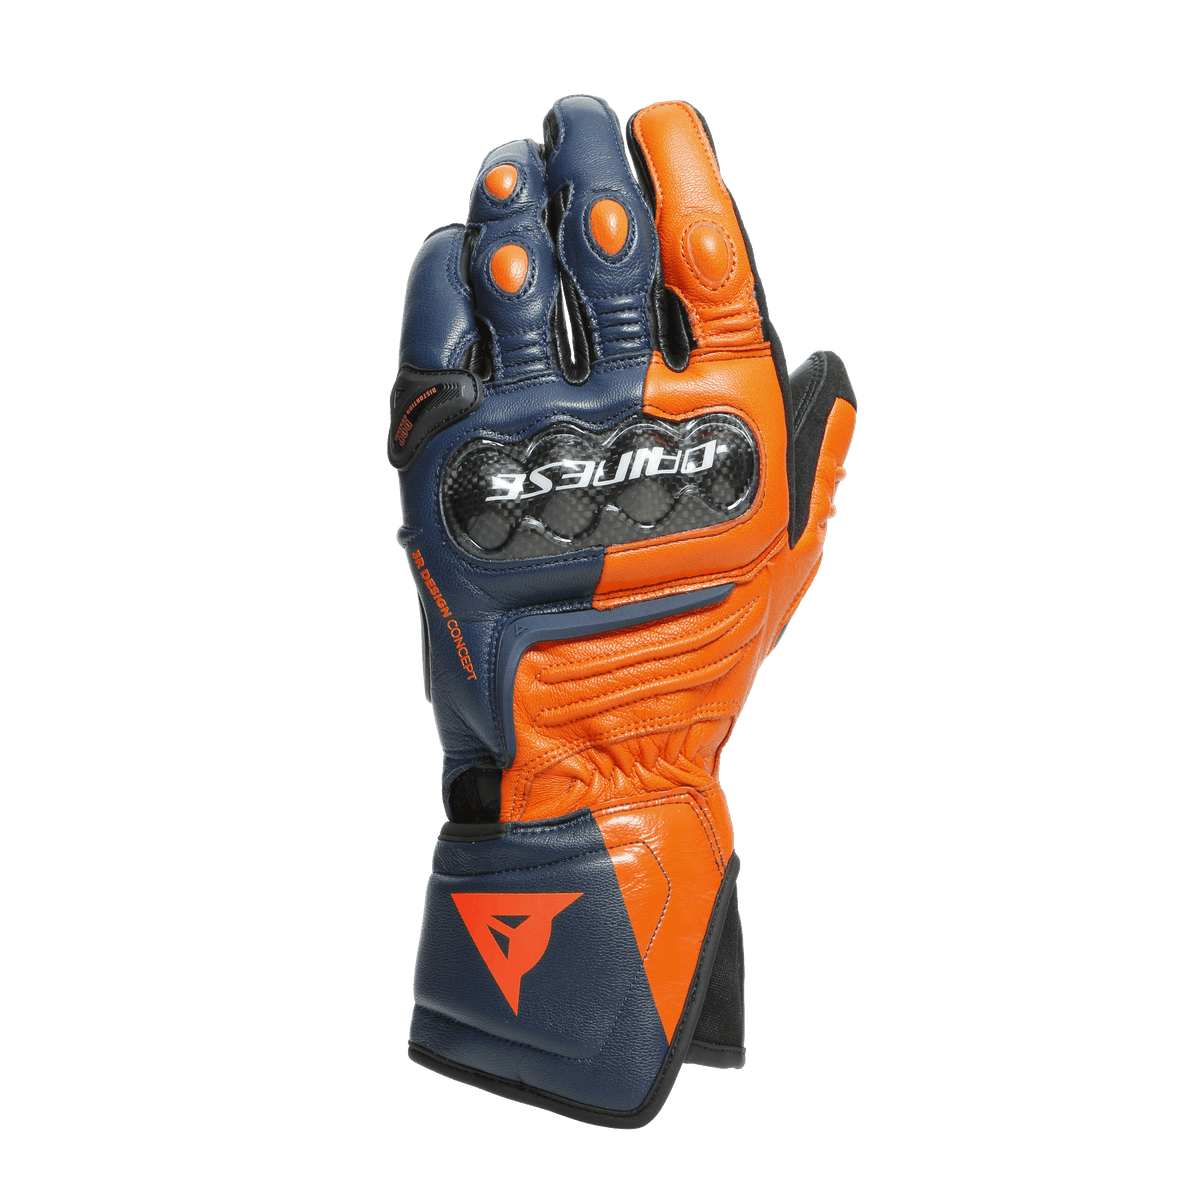 CARBON 3 LONG GLOVES - Riderwing